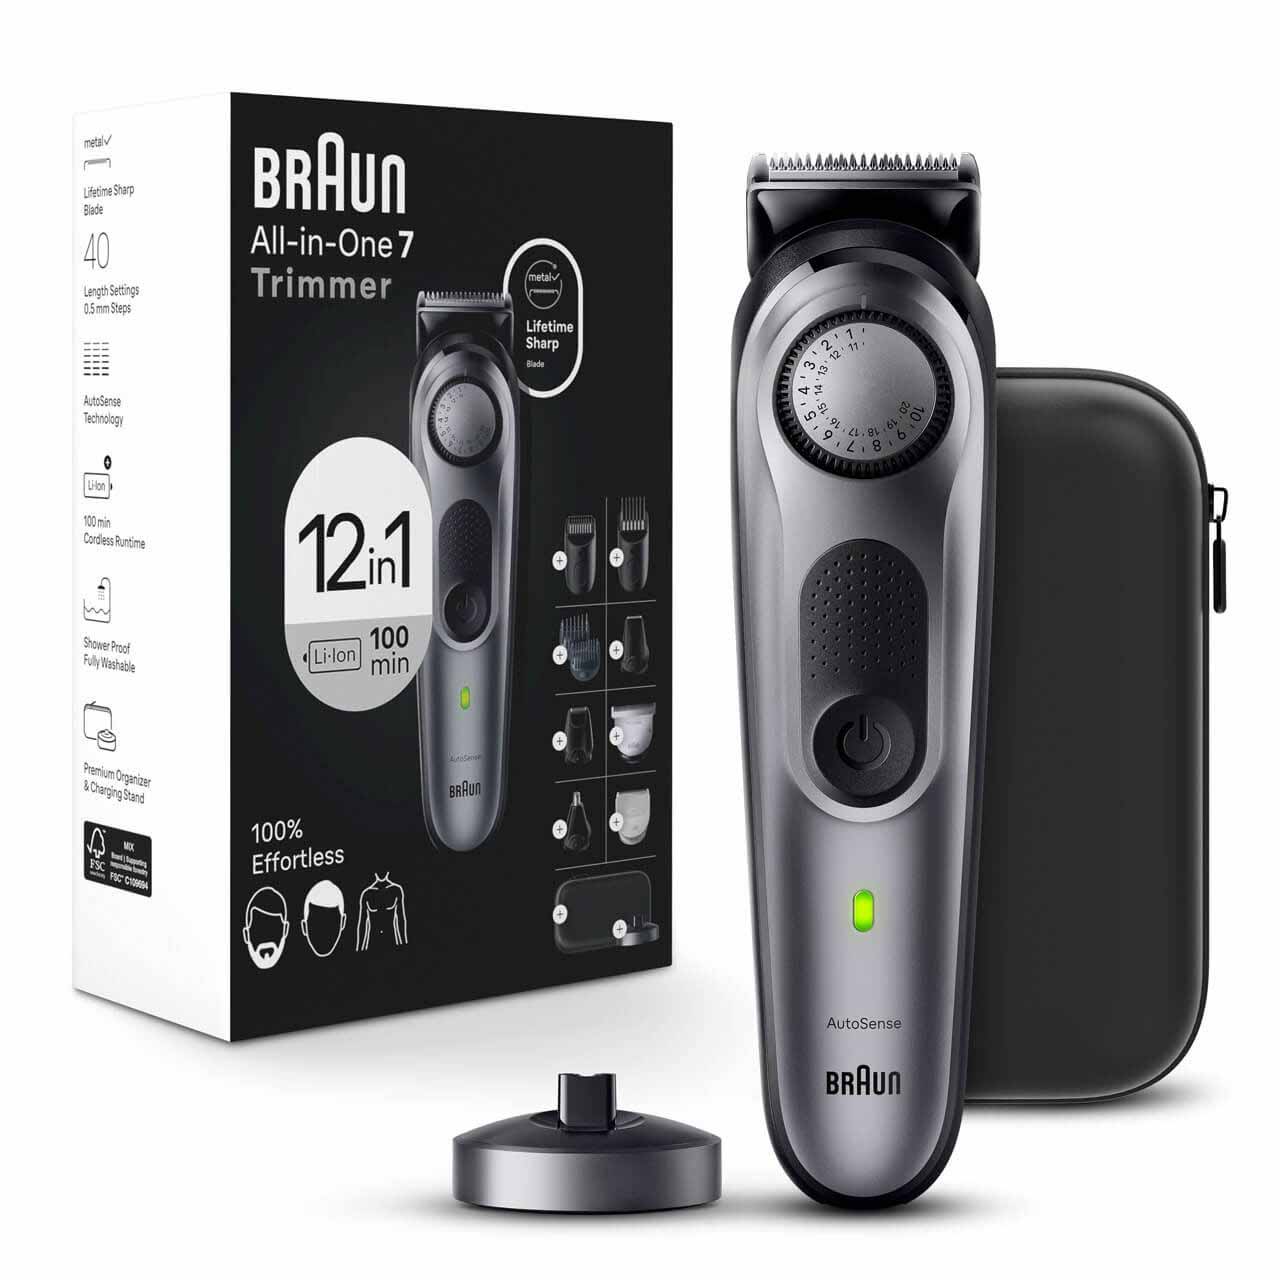 Braun All-in-One Series 7 Trimmer with charger 